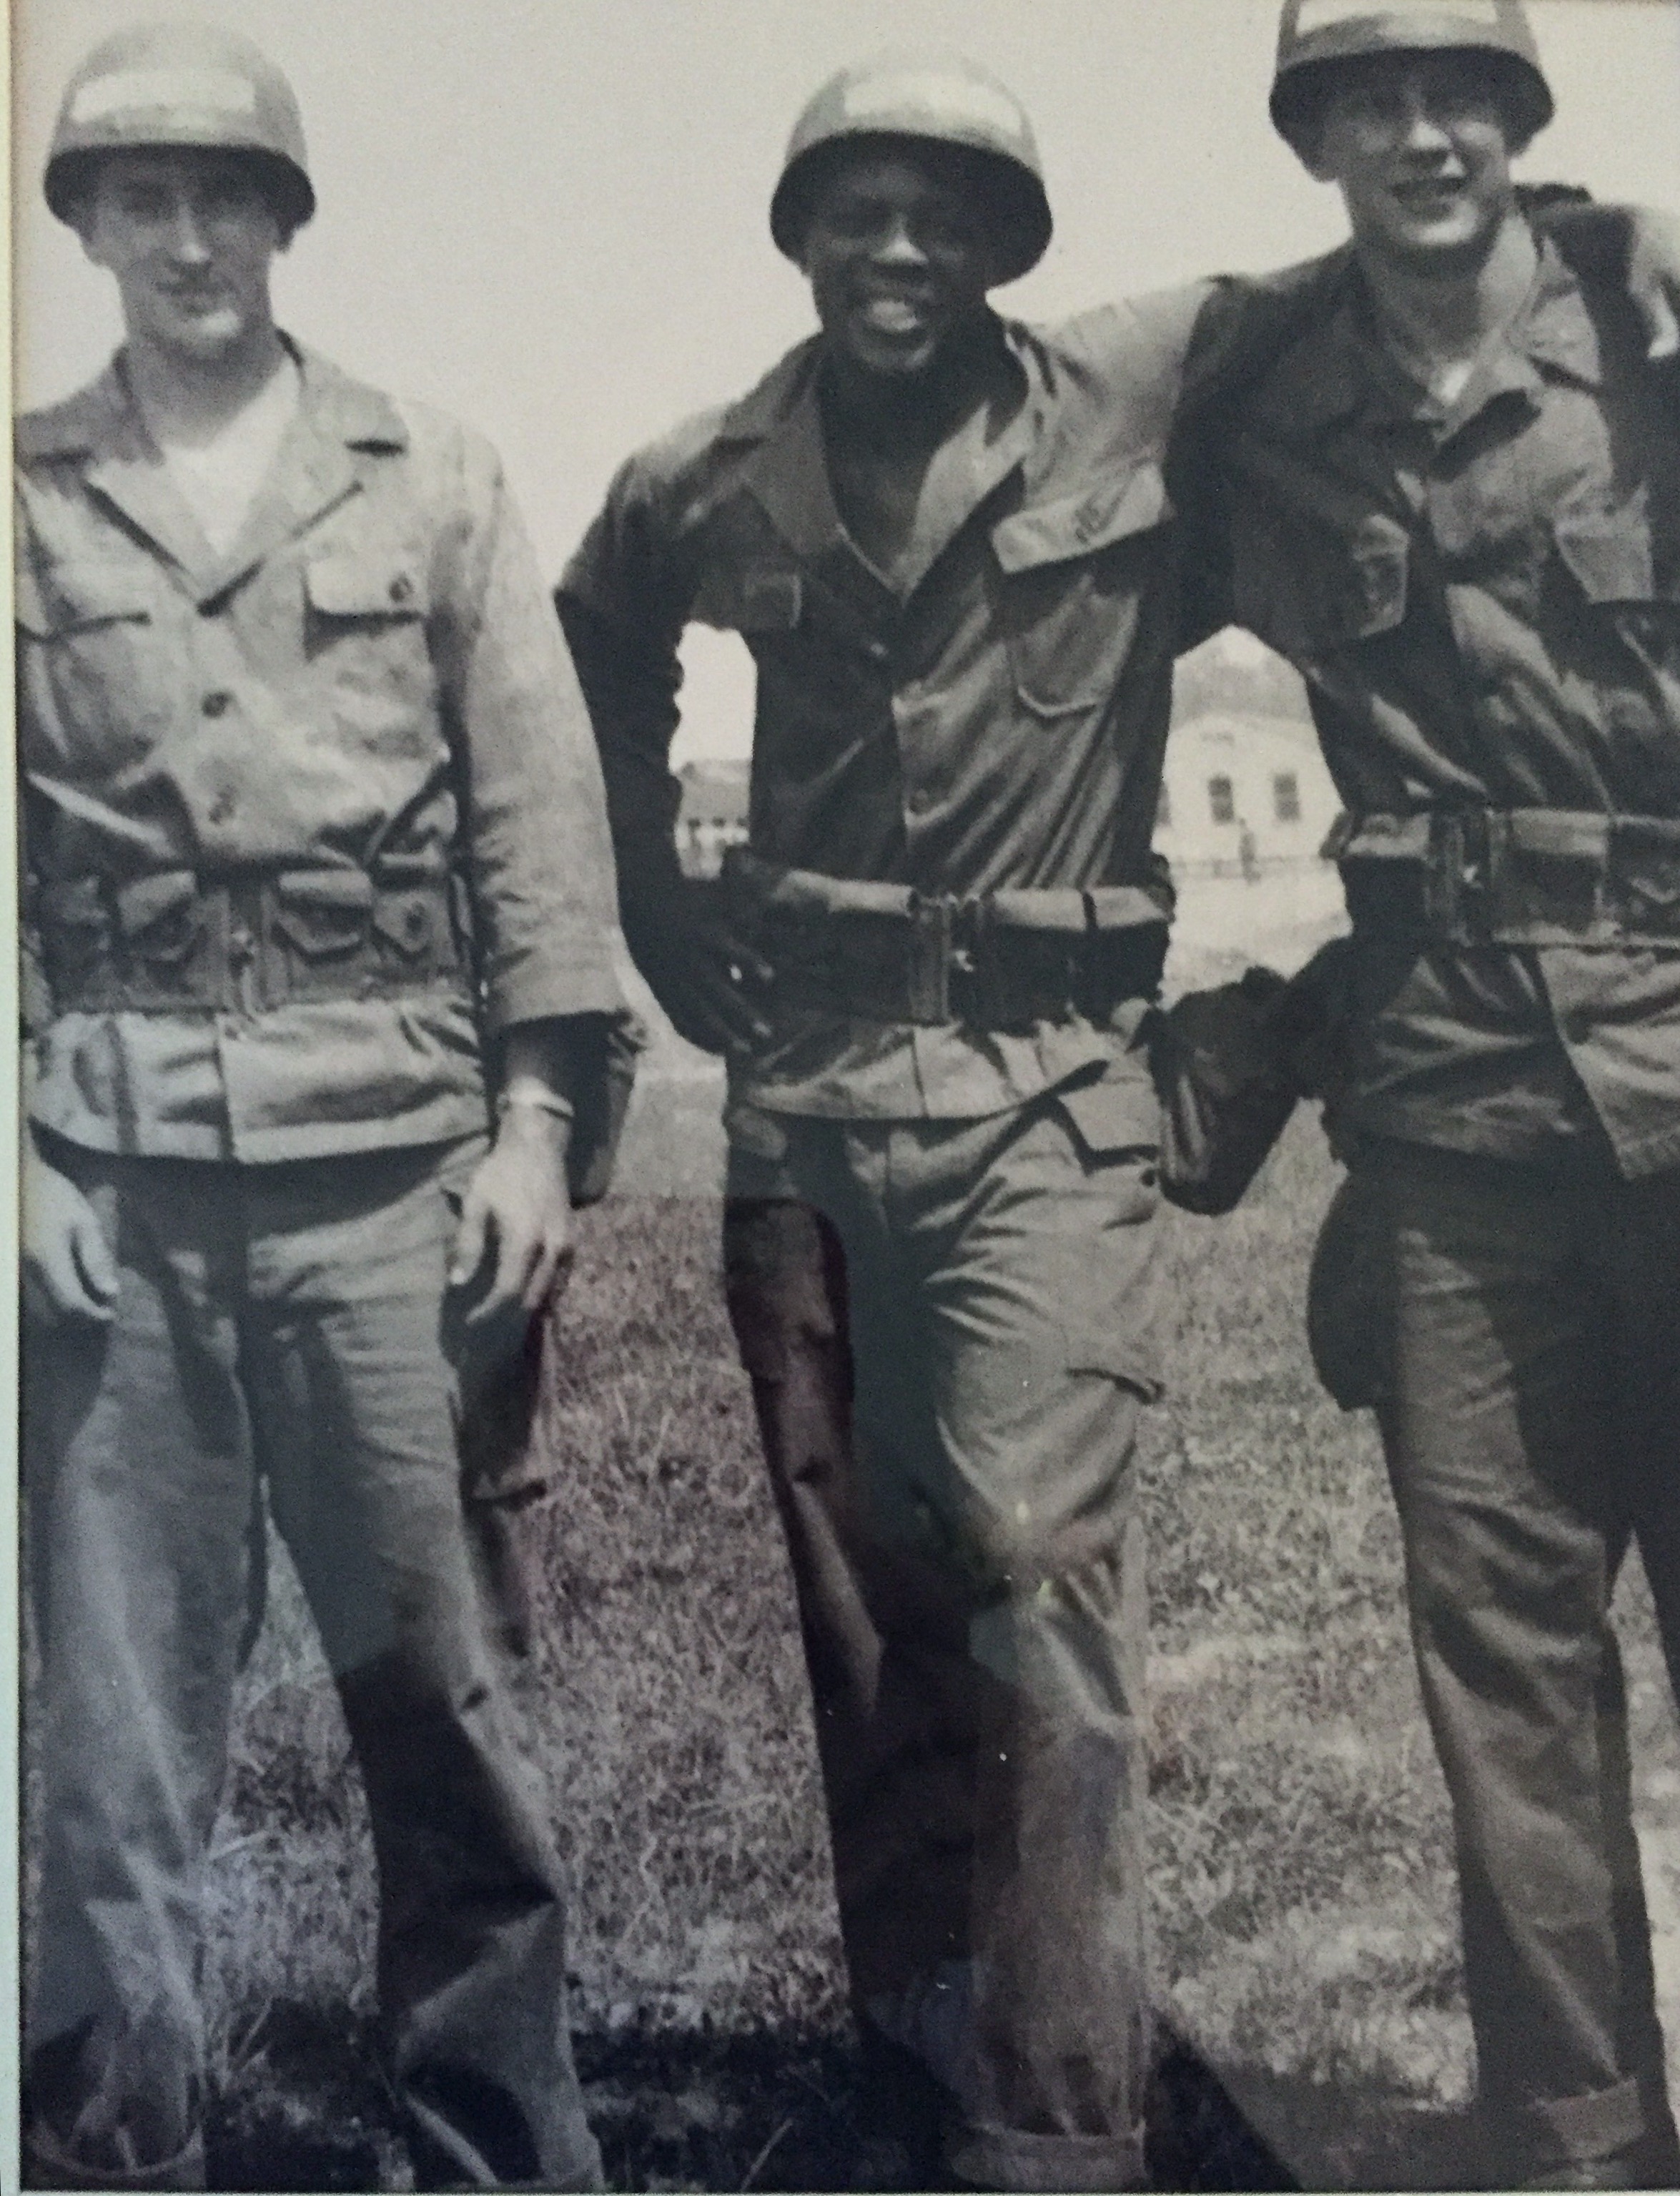 Dr Larry Dorton at Fort Eustice 1943 on the baseball team with Willy Mays.
